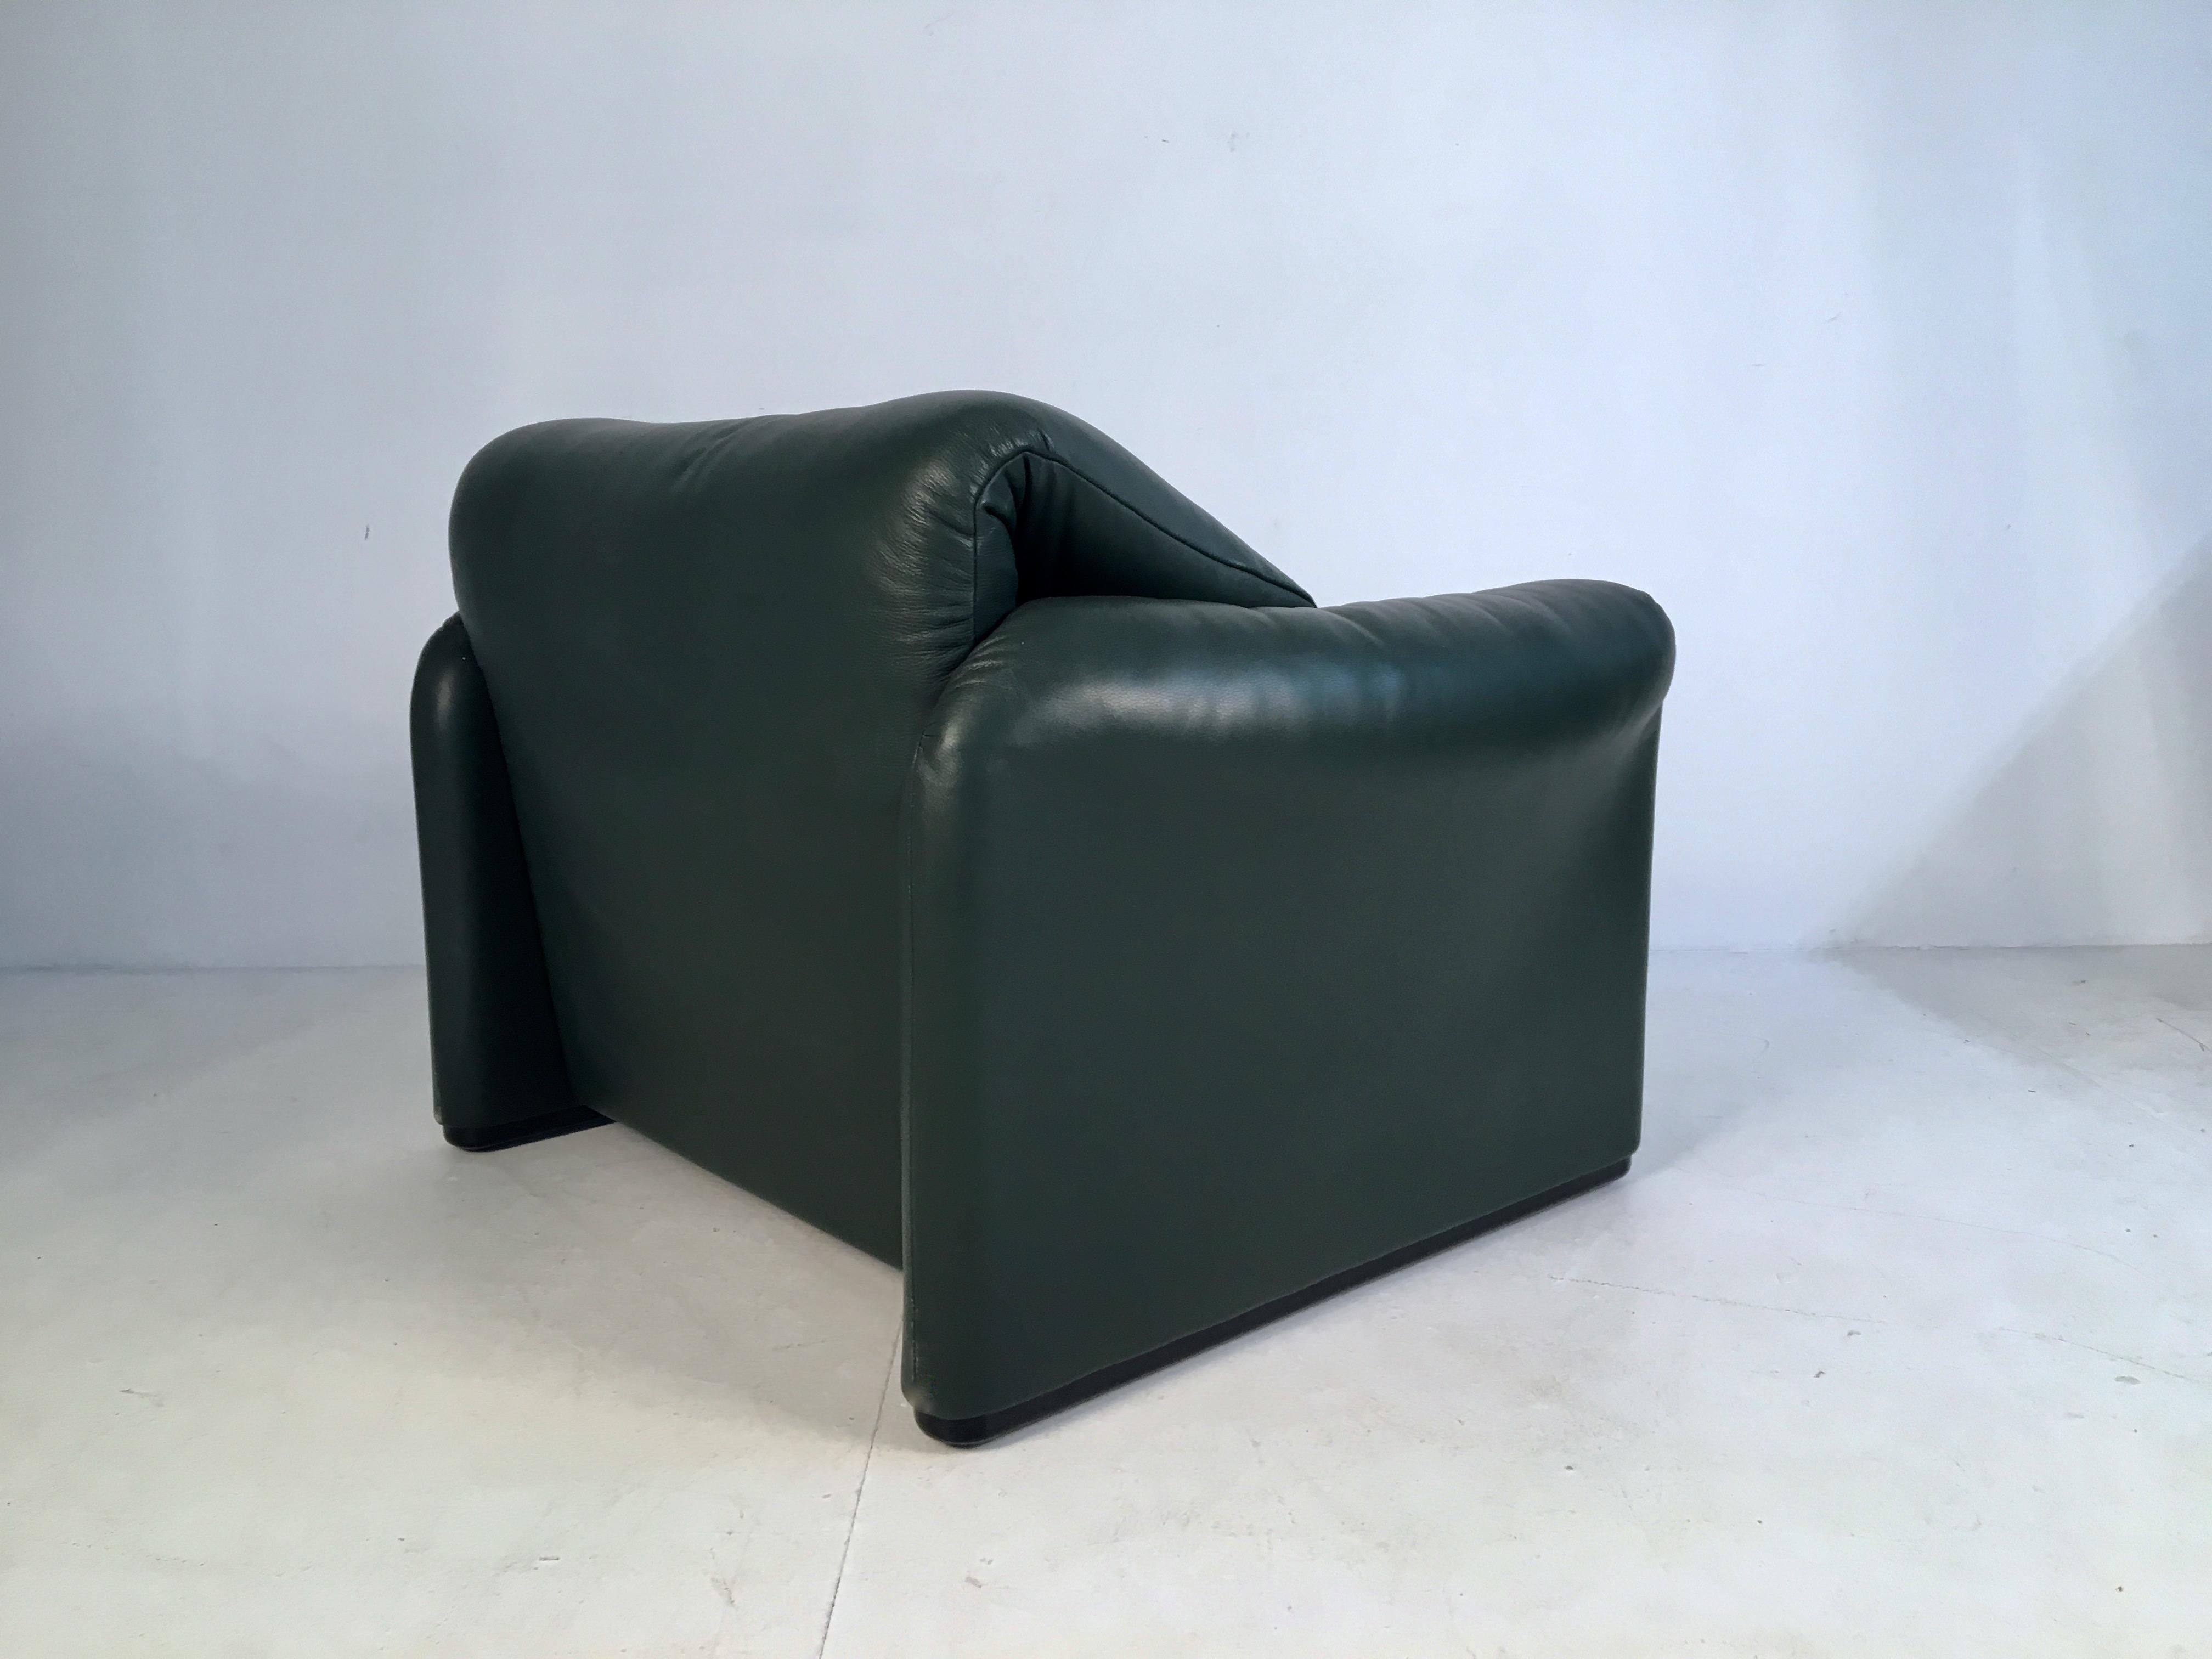 Pair of Green Leather 'Maralunga' Lounge Chairs by Magistretti for Cassina 6